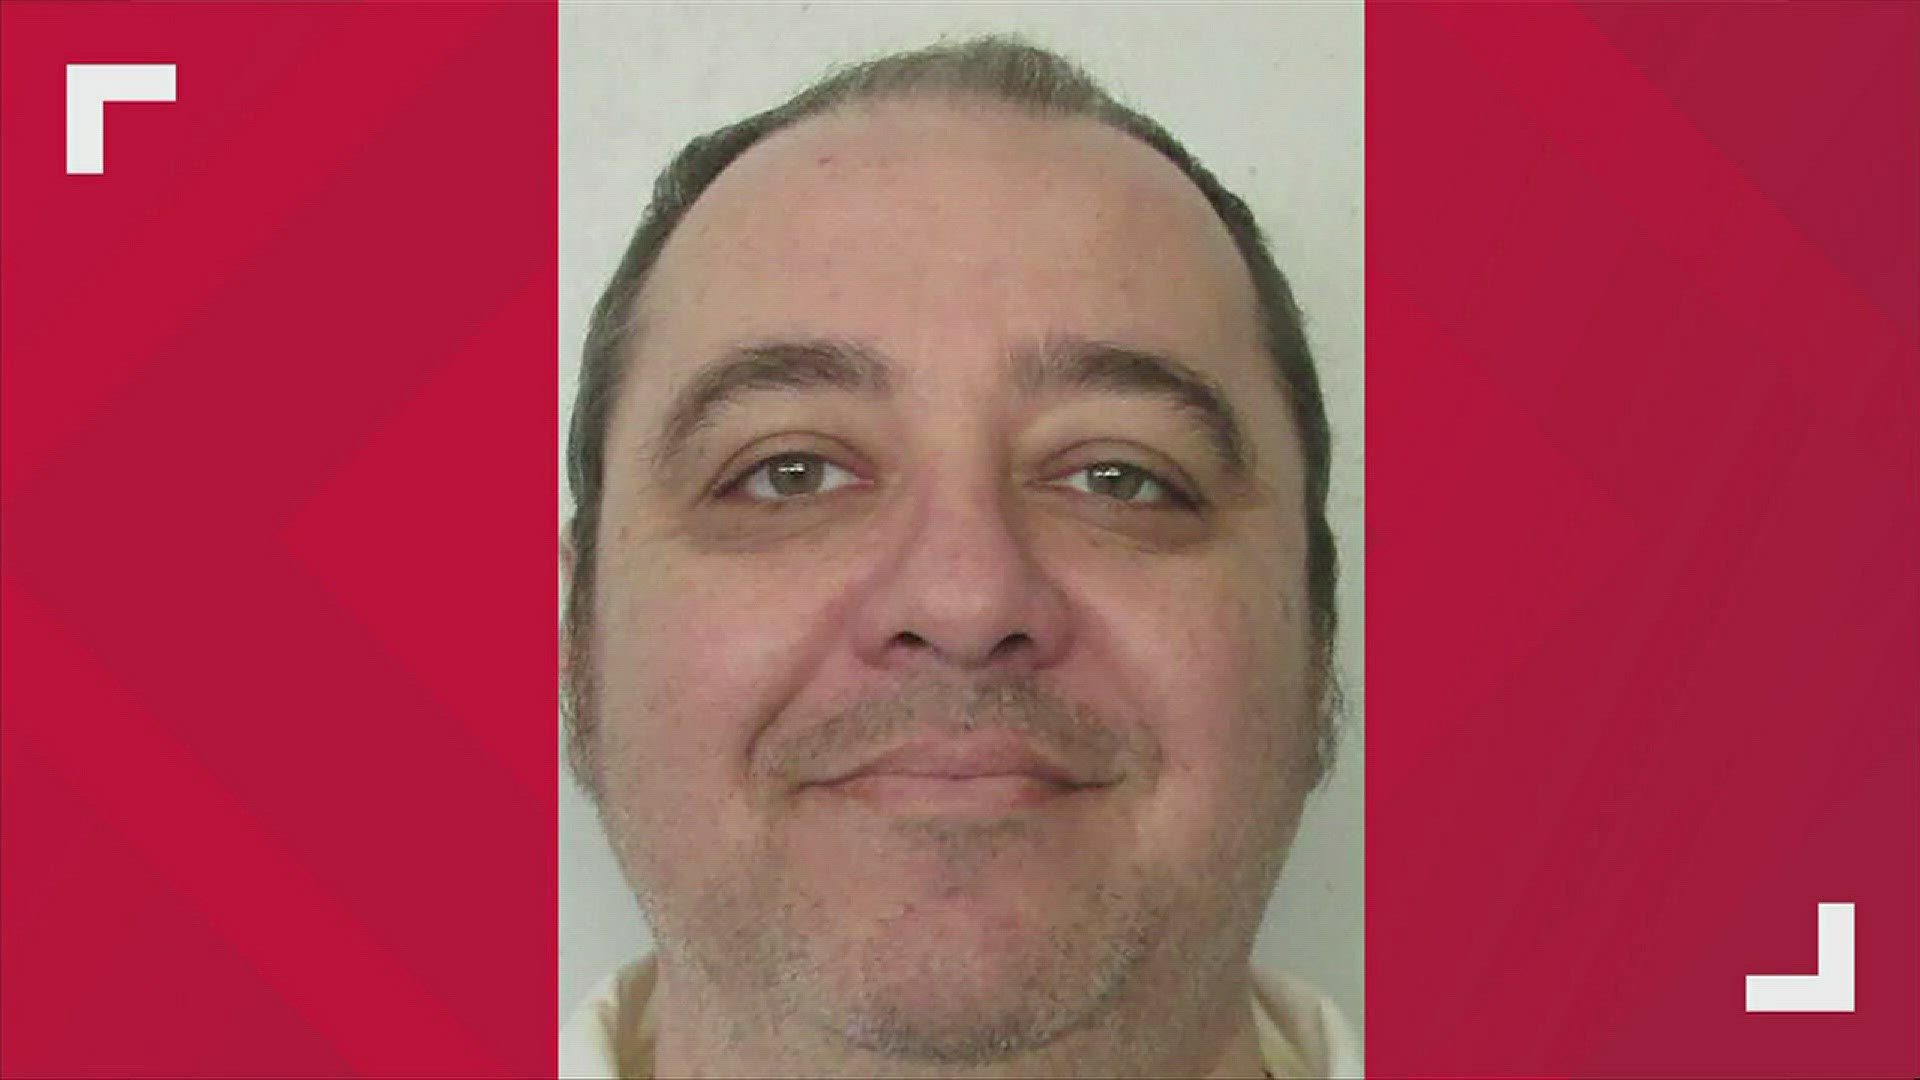 Kenneth Smith is scheduled to be executed on January 25